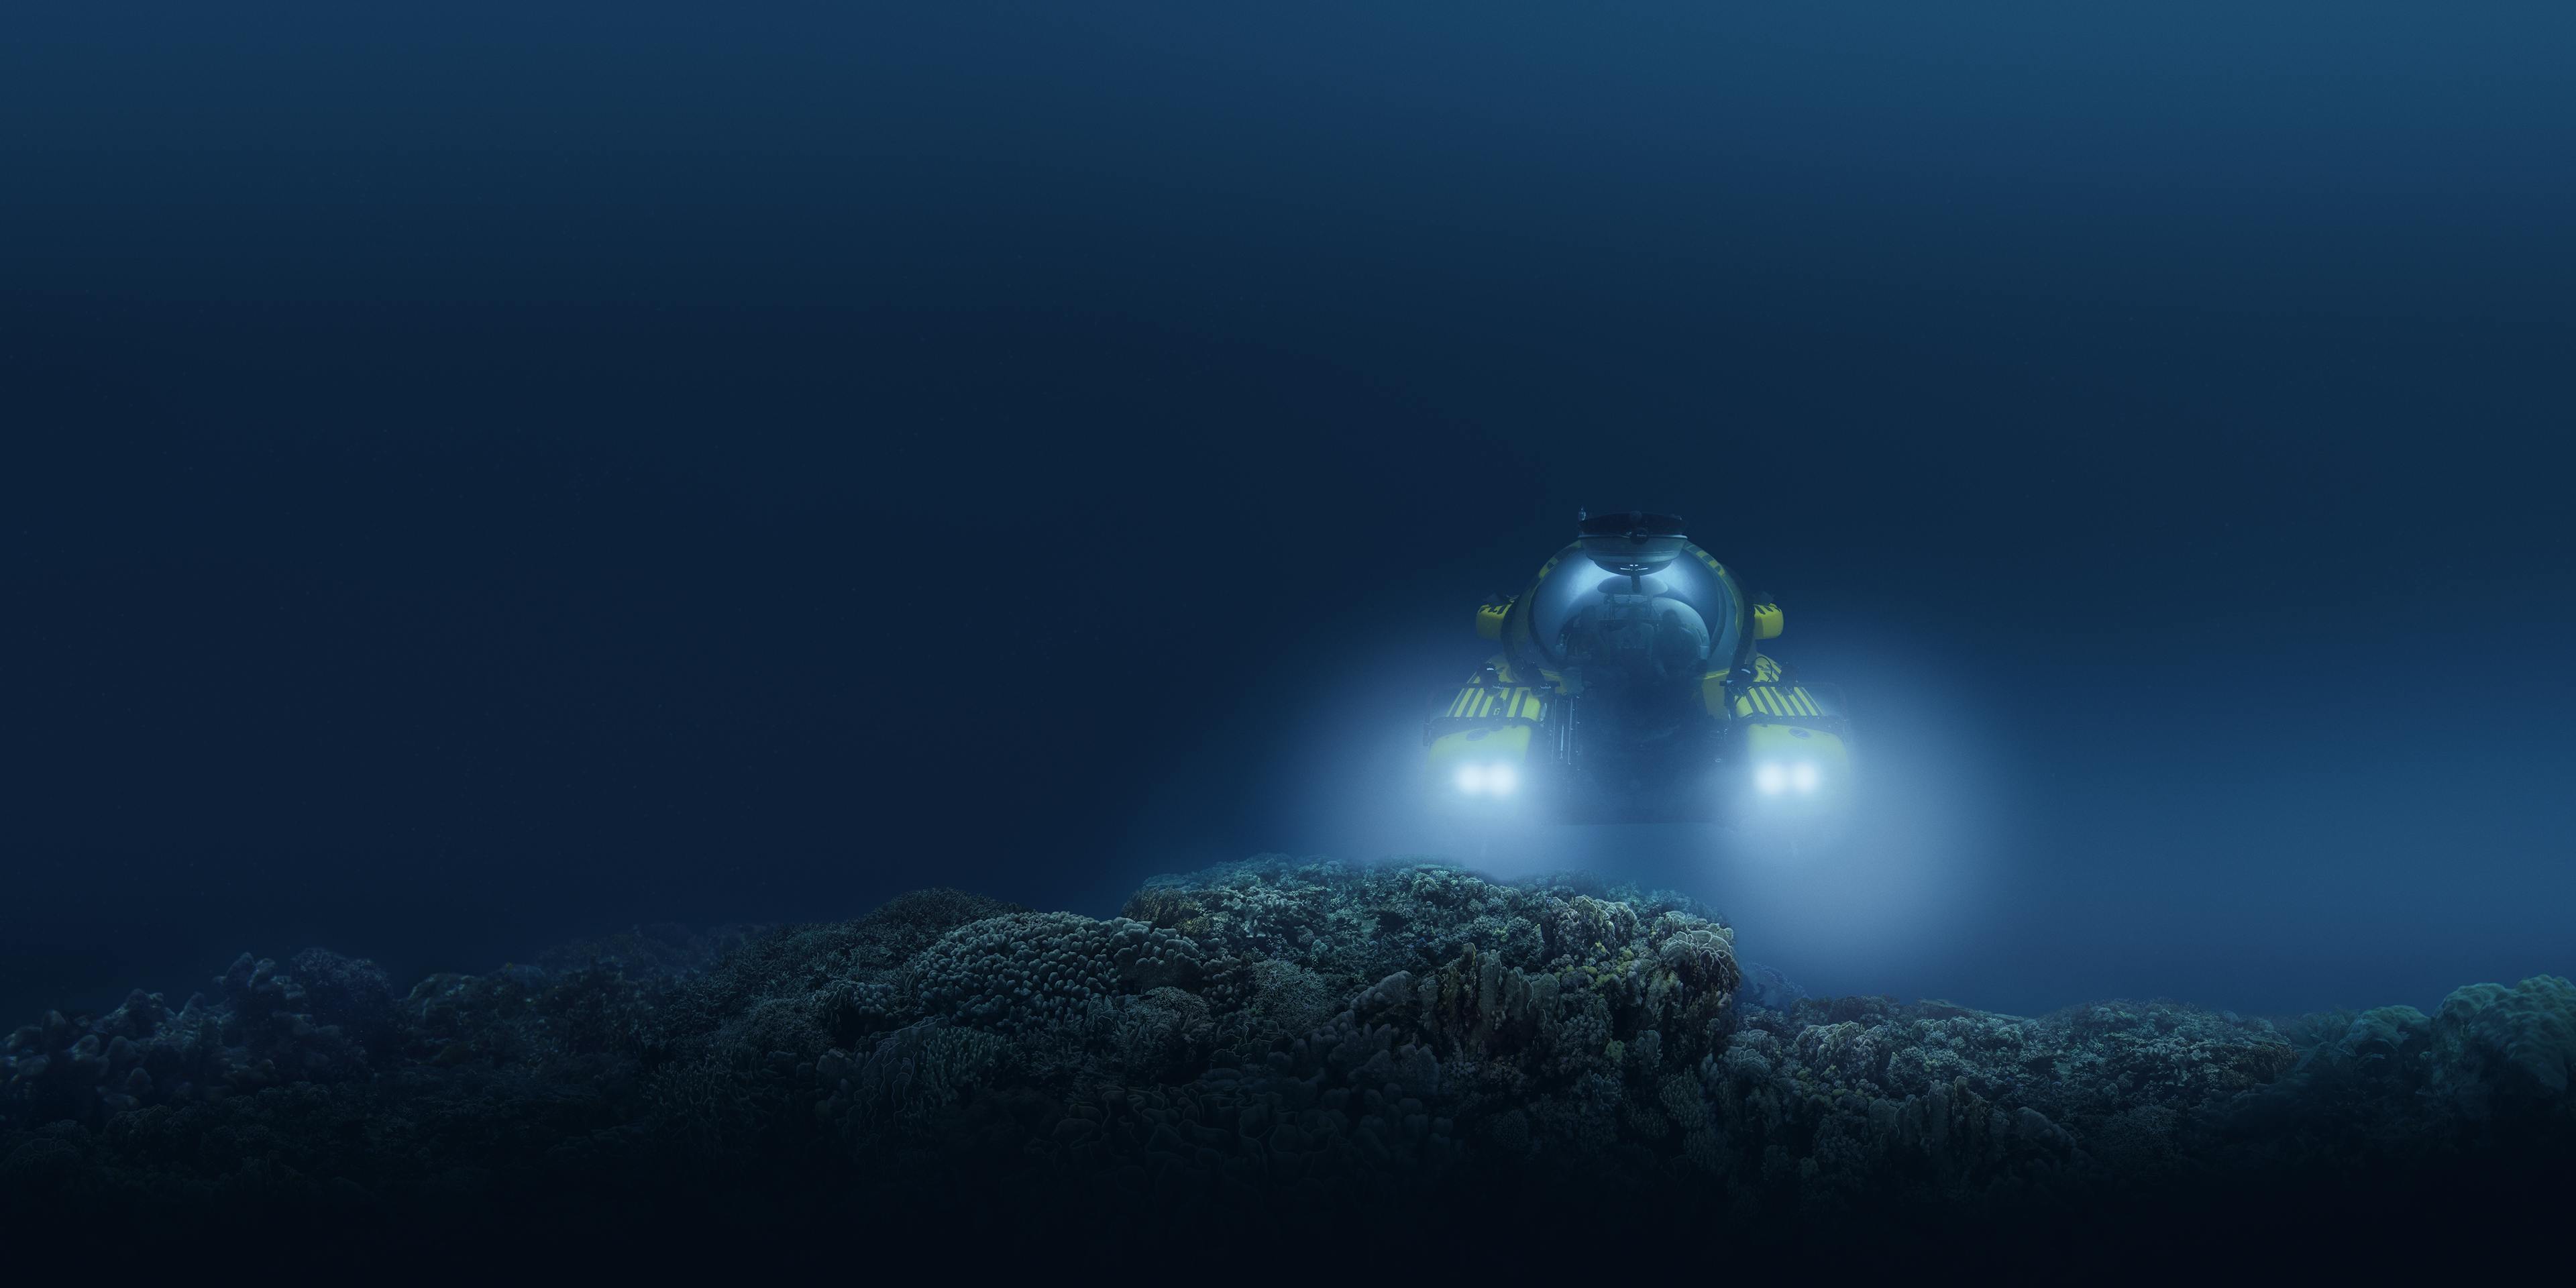 An underwater image of a submersible with its headlights illuminating a rock formation.